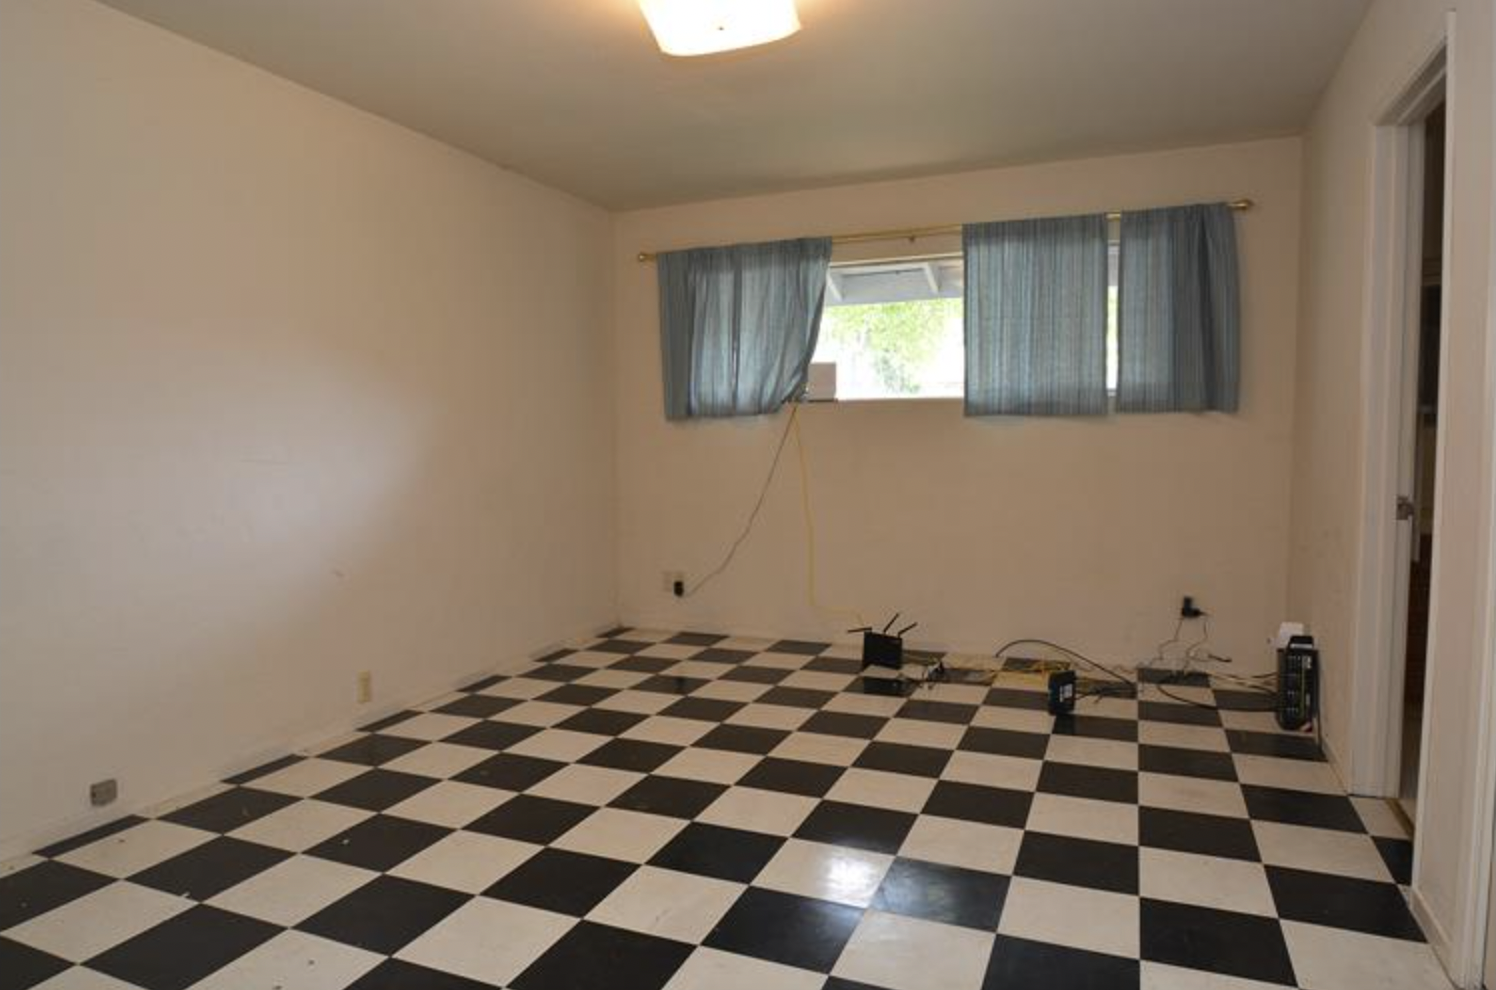  Before image of a room with windows on the upper half of the wall and a checkered linoleum floor.  